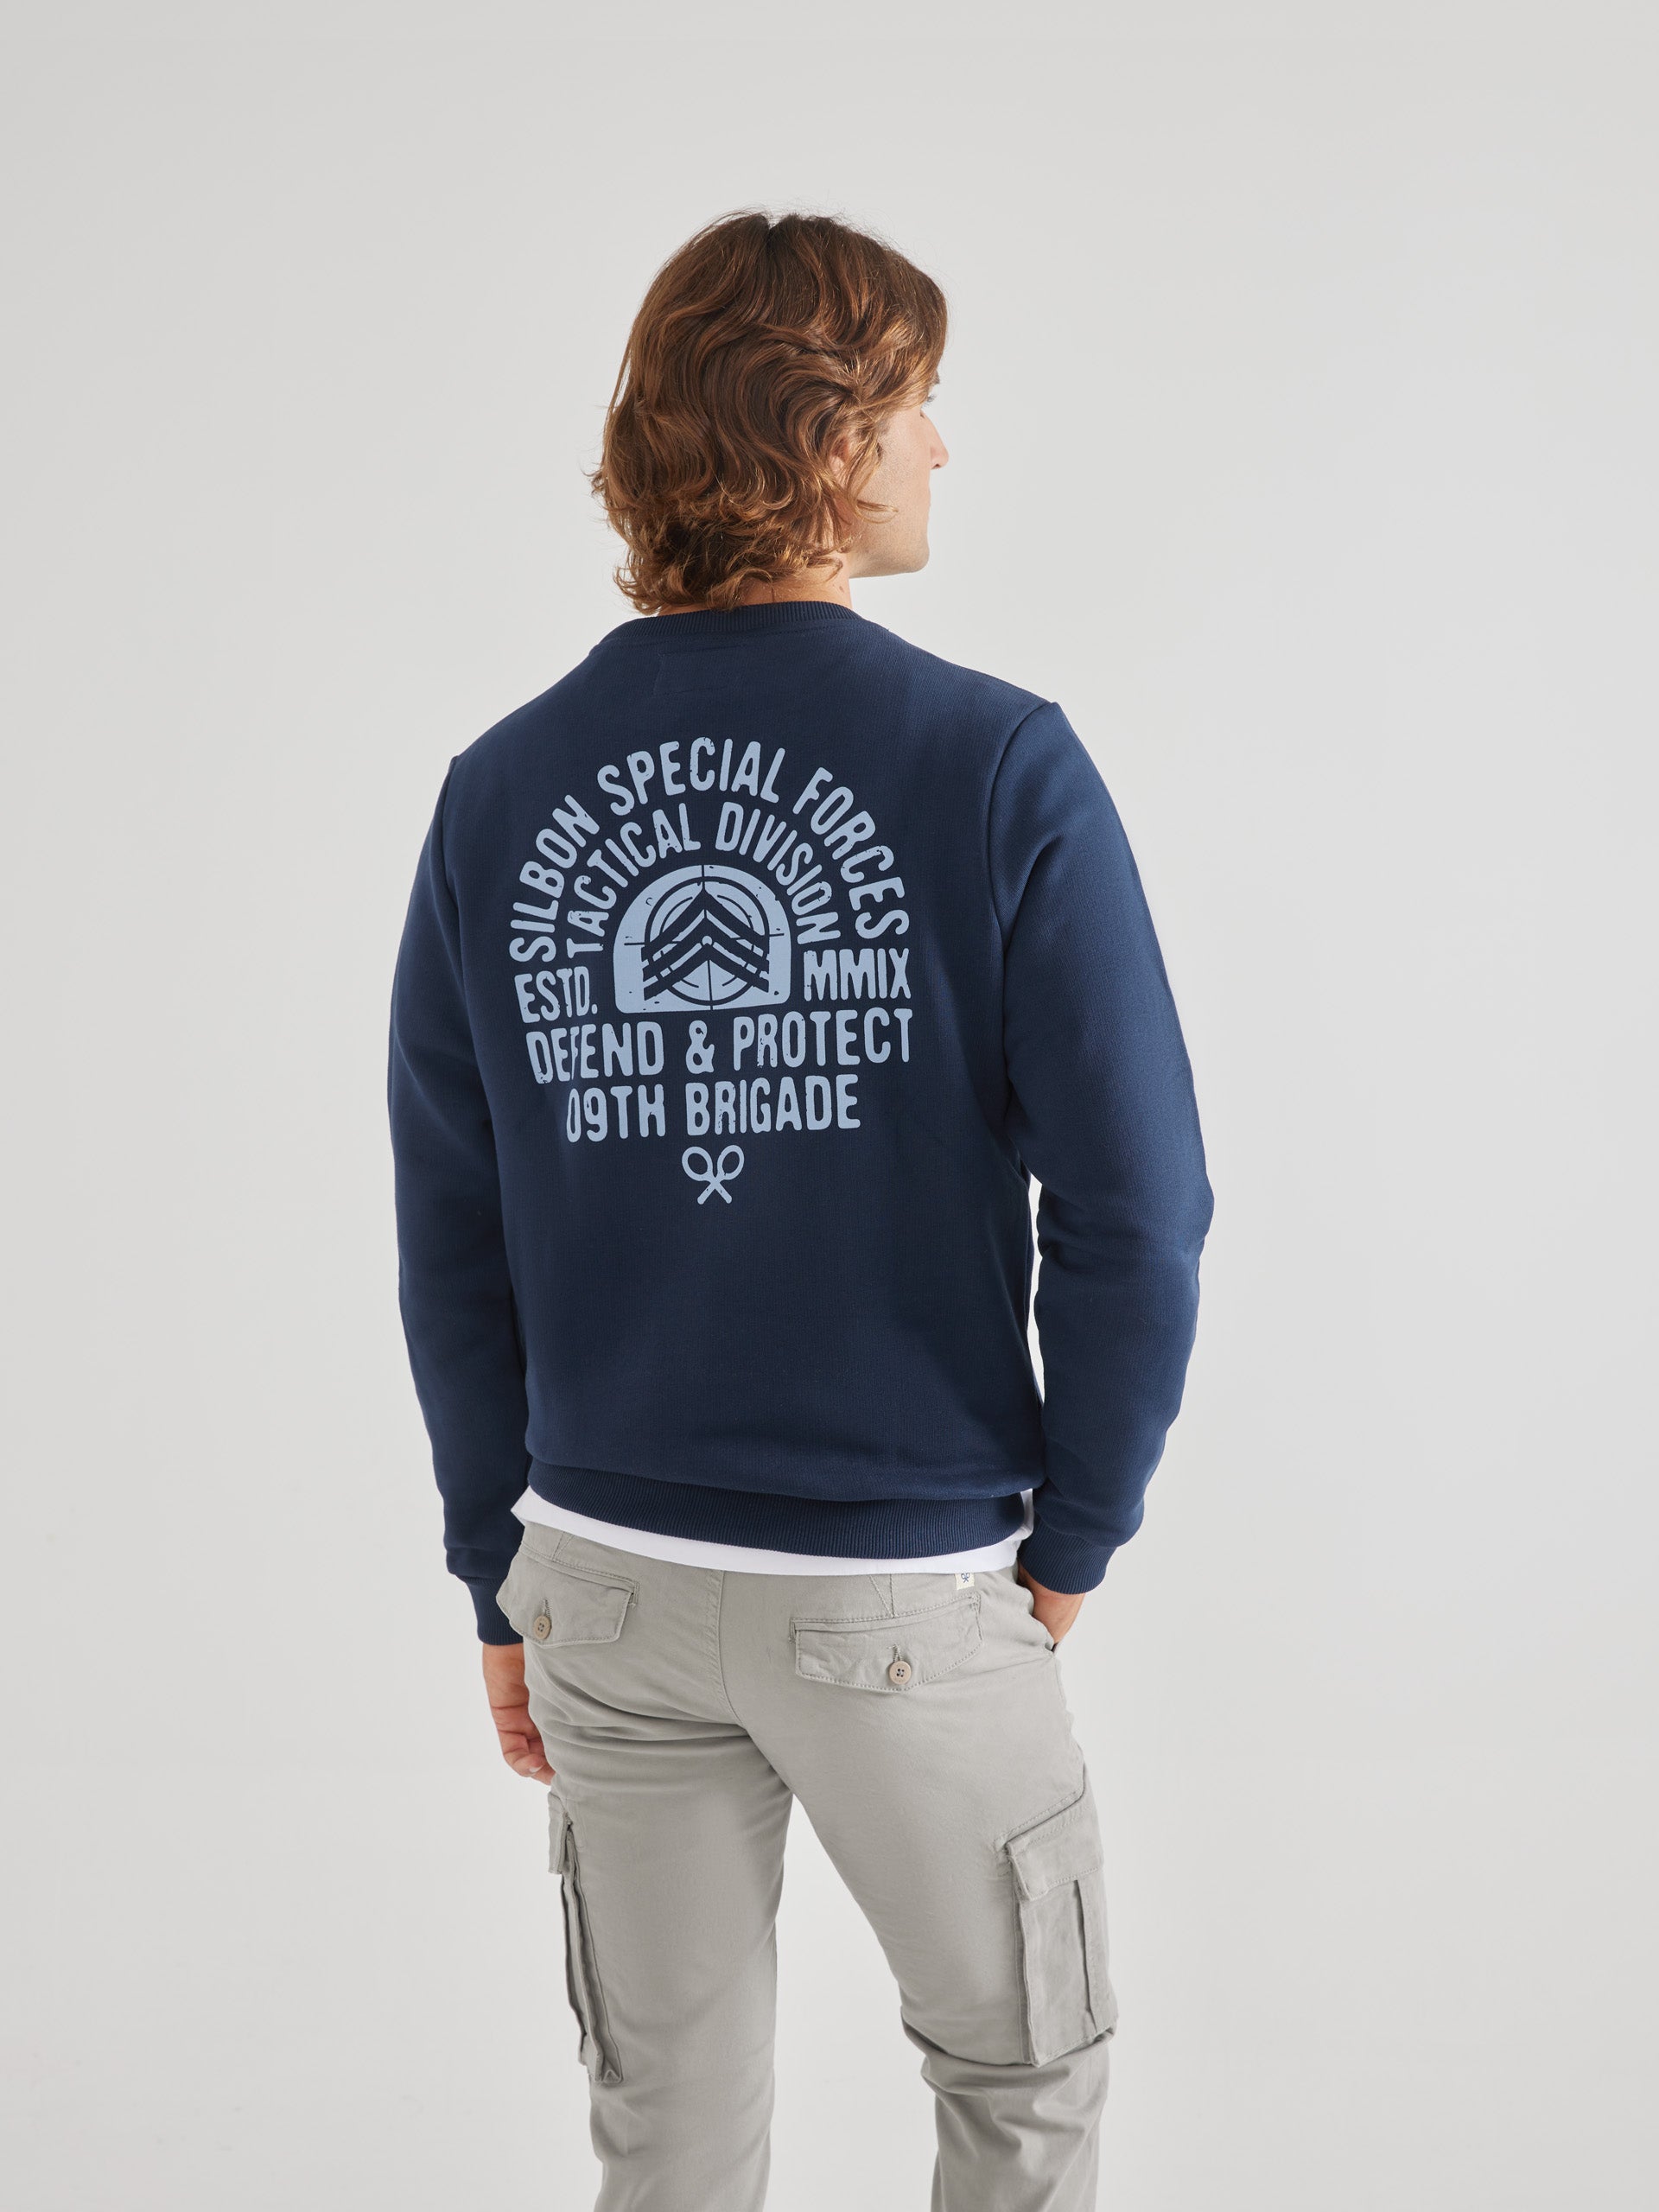 Navy blue special forces sweatshirt